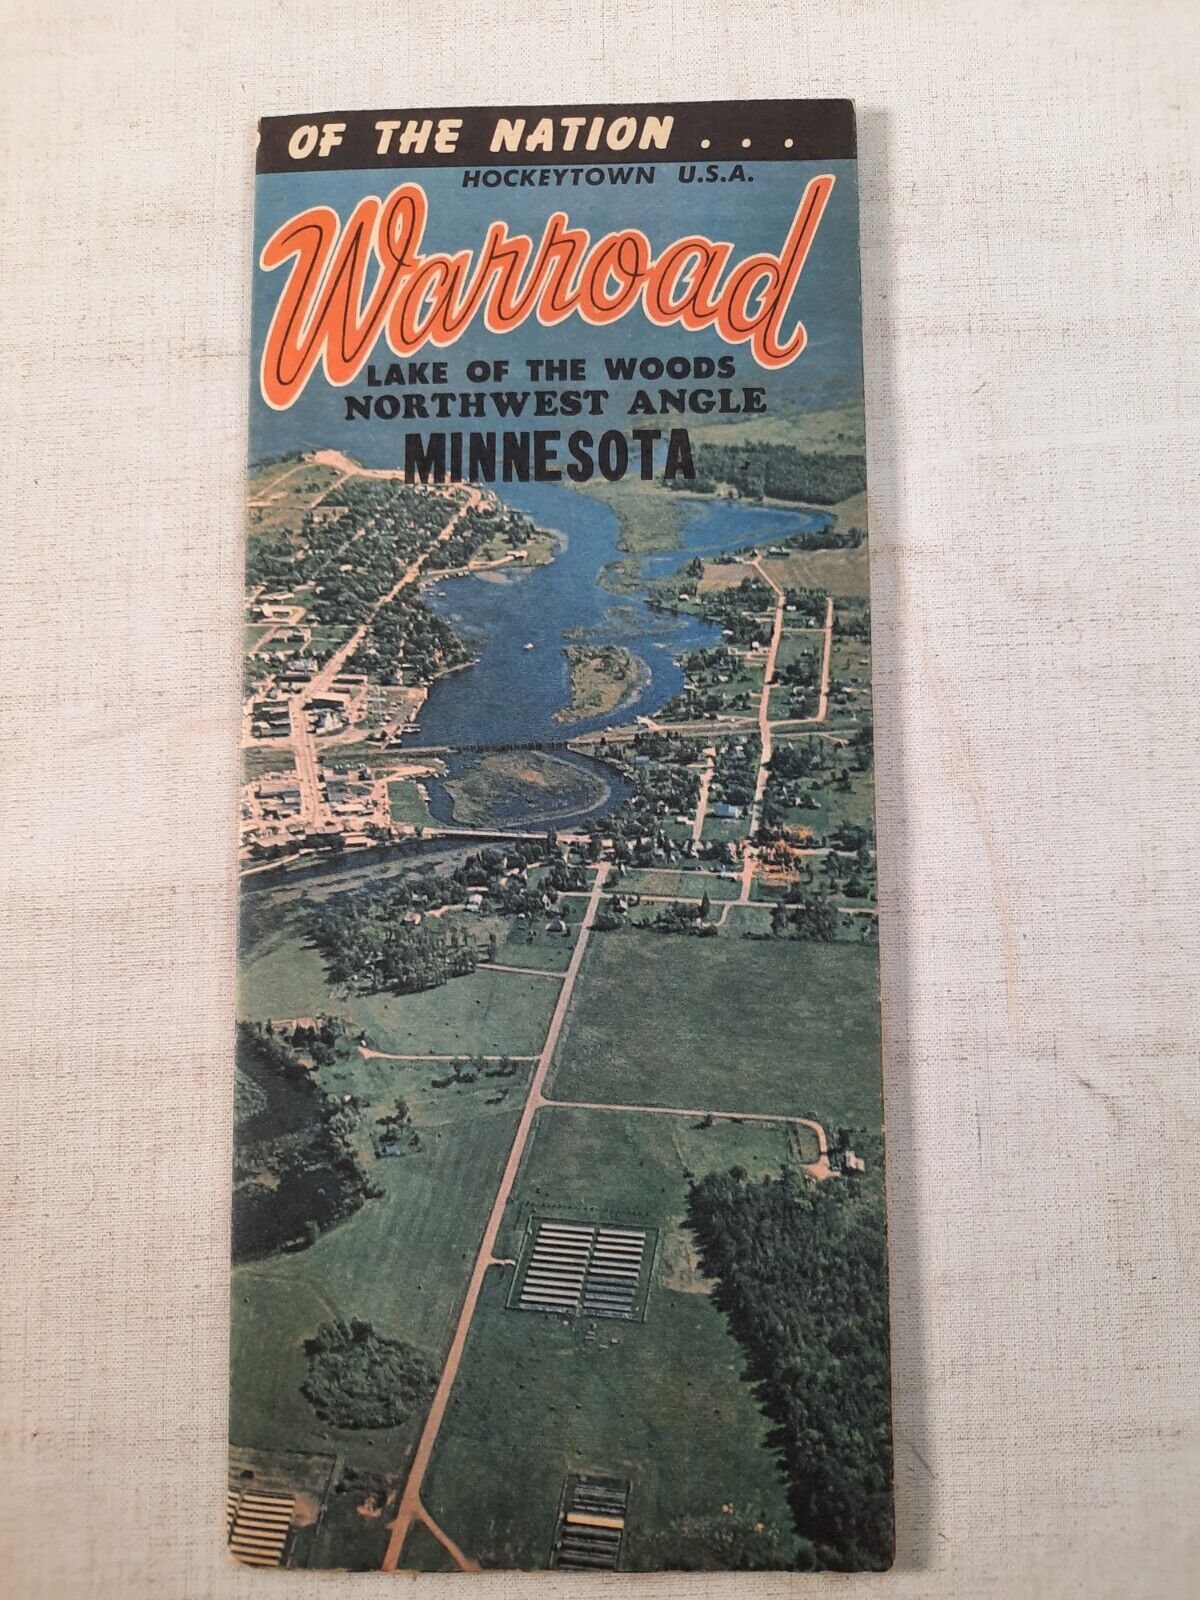 Vintage warroad lake of the woods area Minnesota Vacation Pamphlet